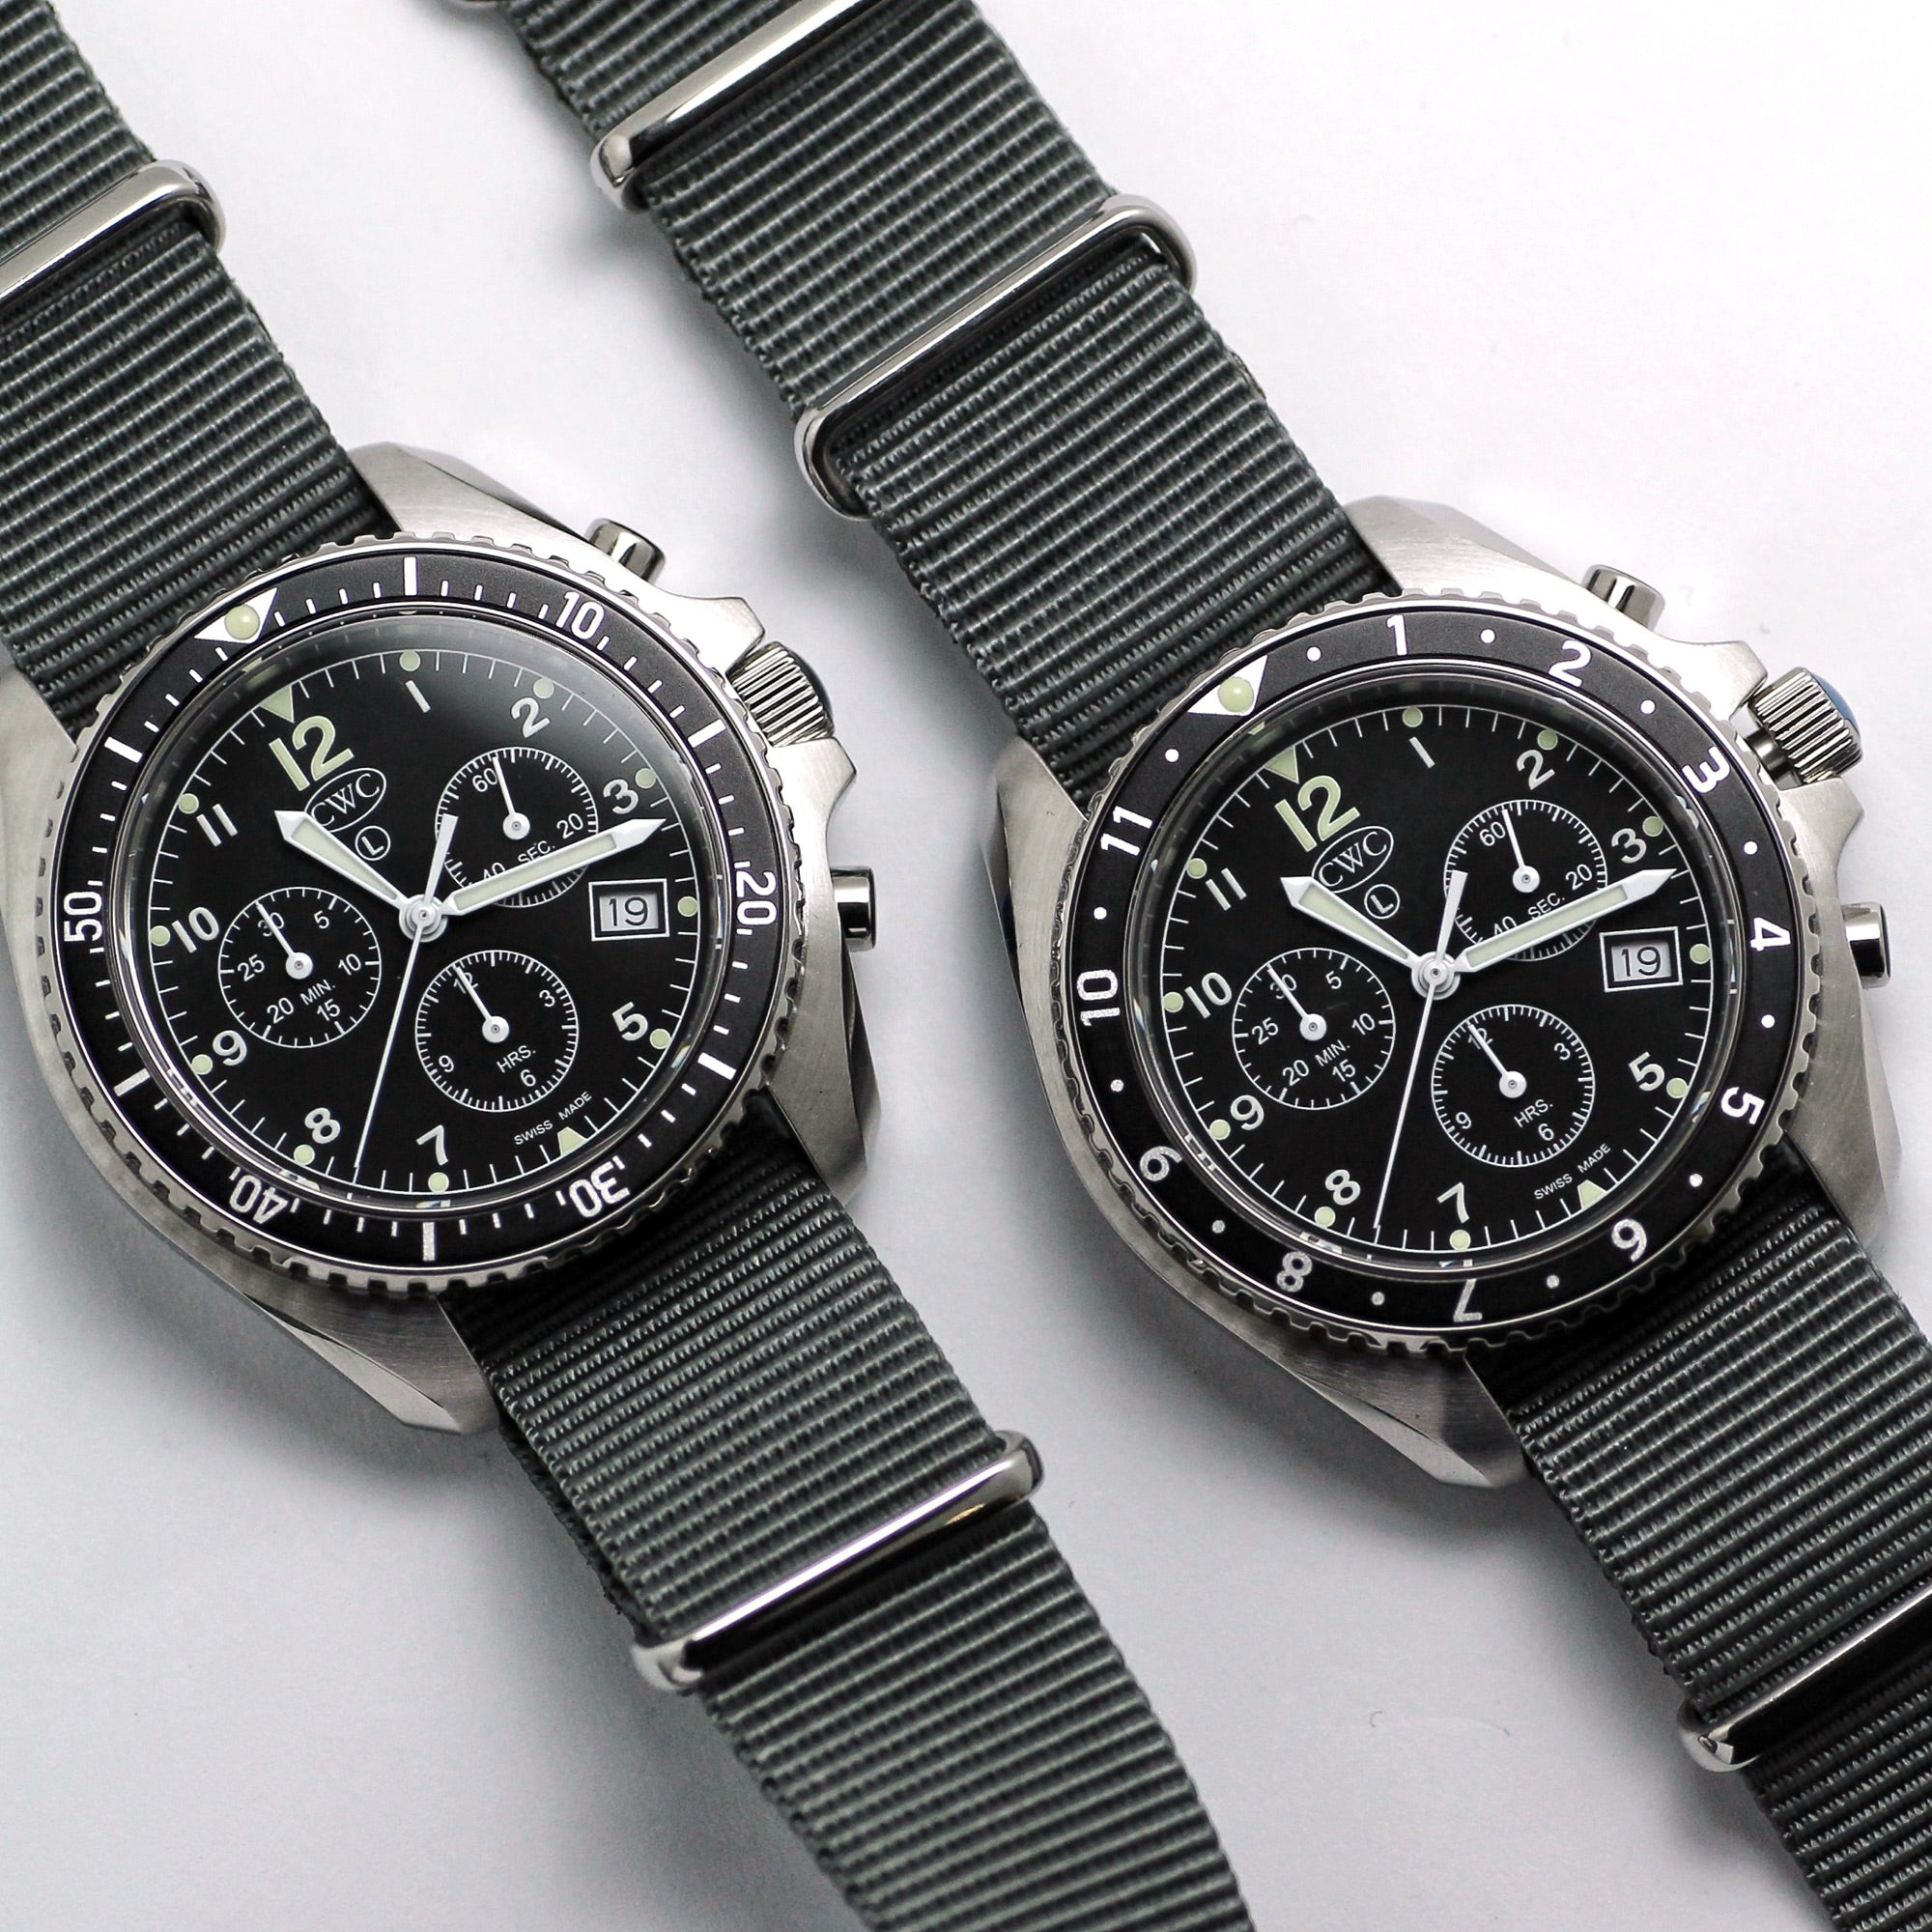 CABOT SEA FALCON CHRONO DIVER WATCH - BOTH BEZELS SIDE BY SIDE